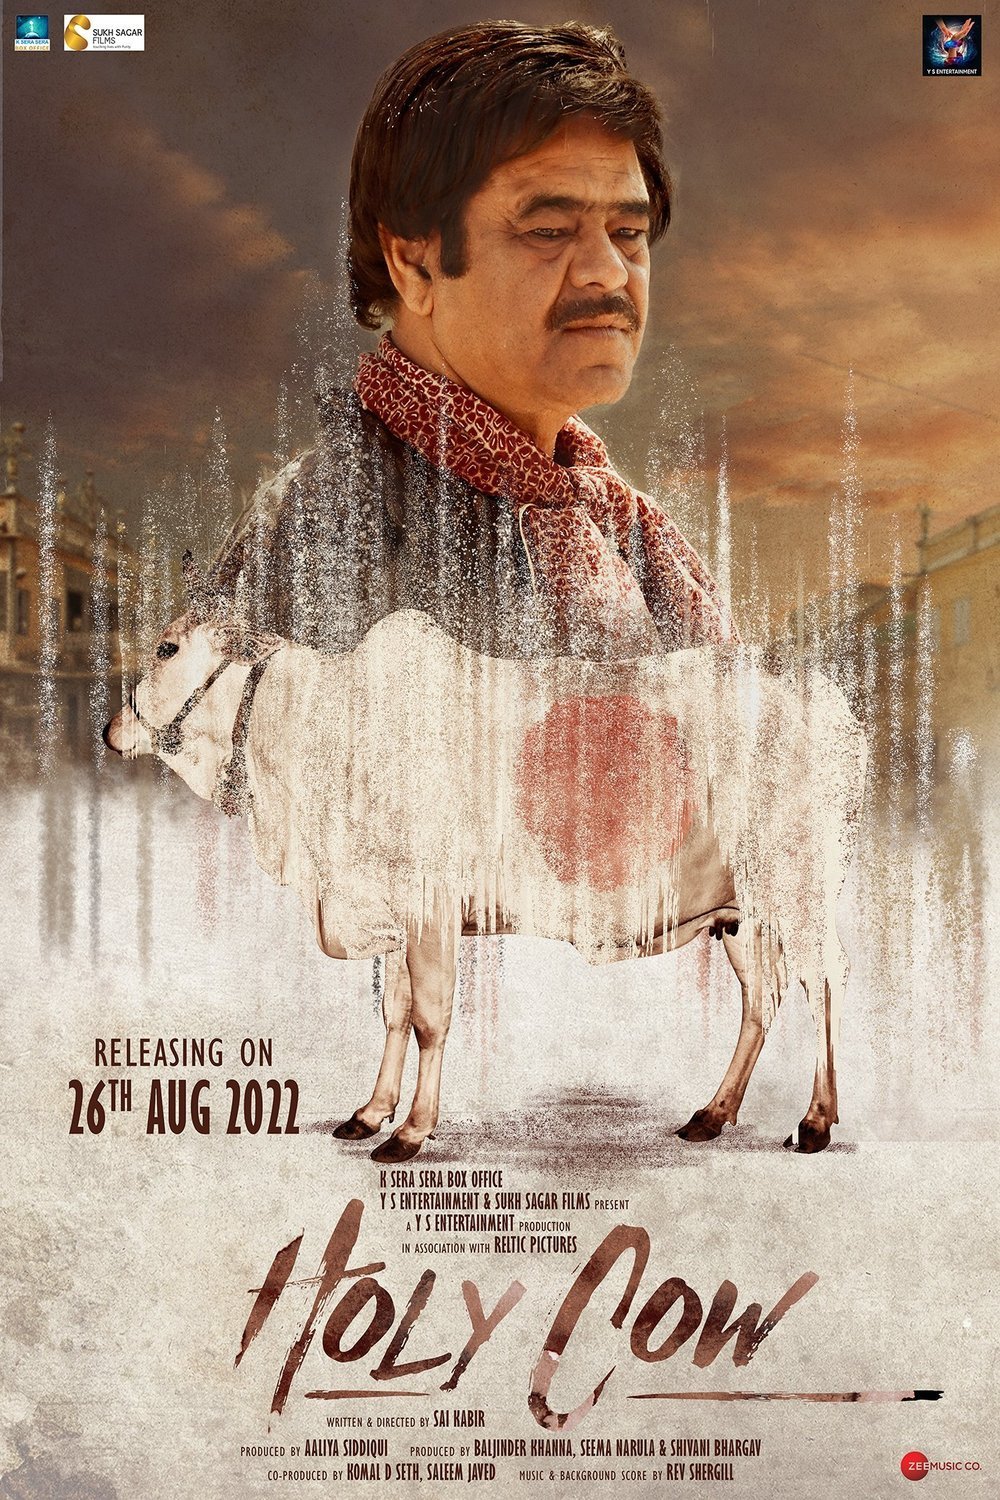 Hindi poster of the movie Holy Cow